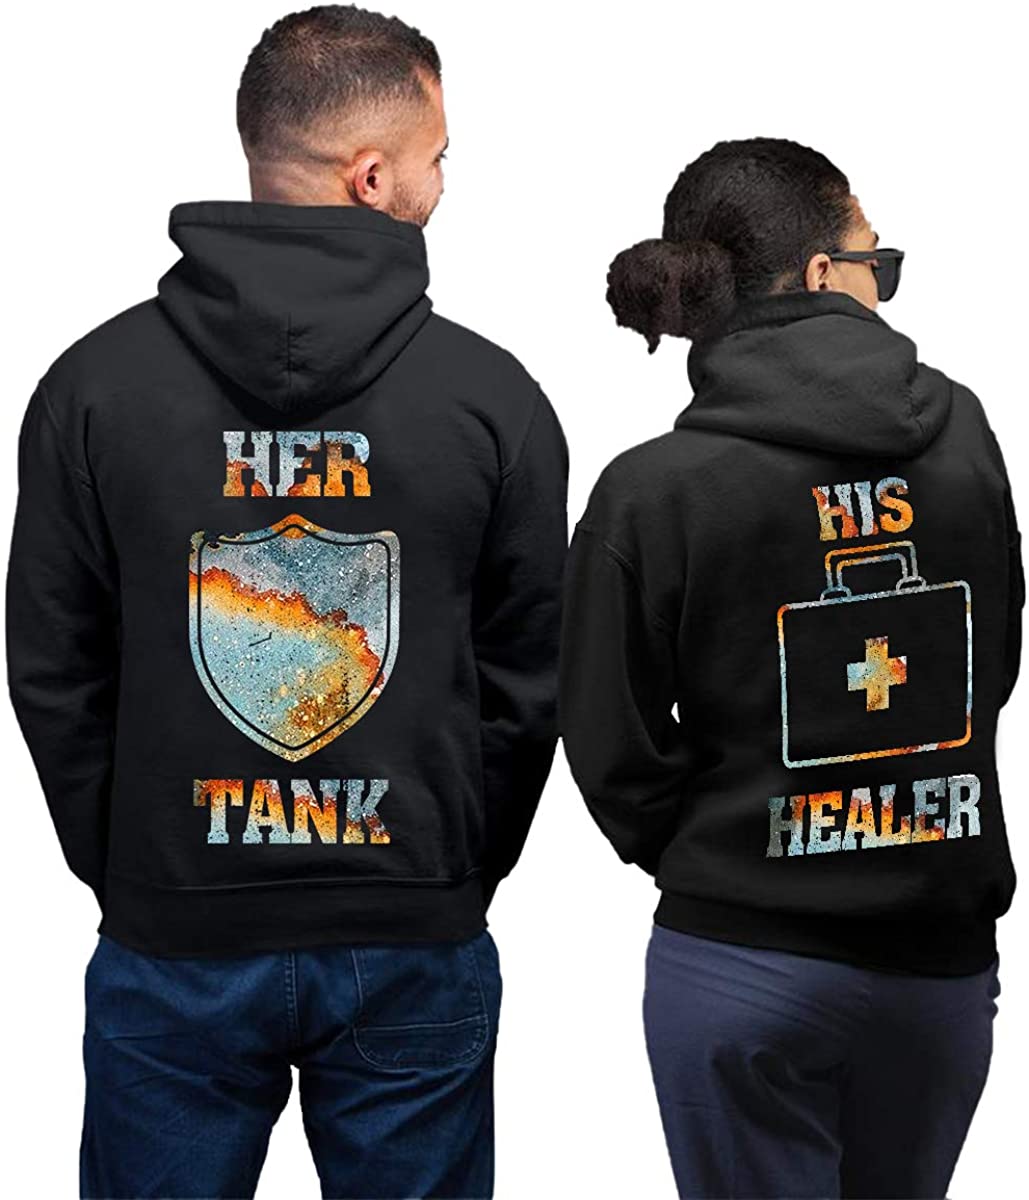 Gamer Funny Couple Her Tank His Healer Galaxy Hoodie Gifts For Couple Lover Matching